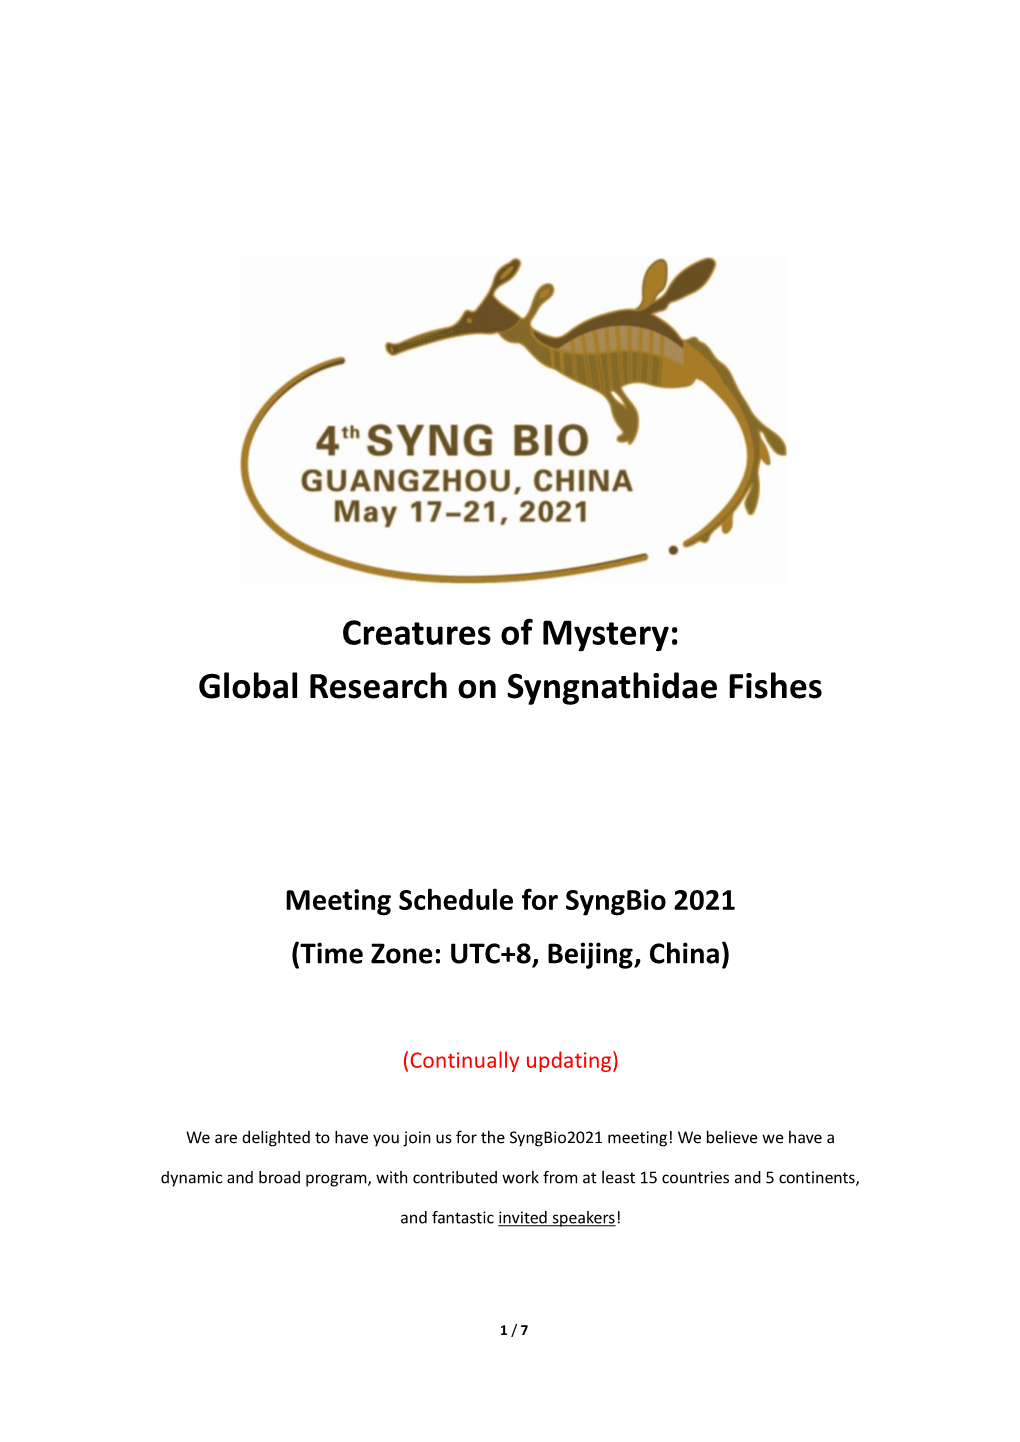 Creatures of Mystery: Global Research on Syngnathidae Fishes